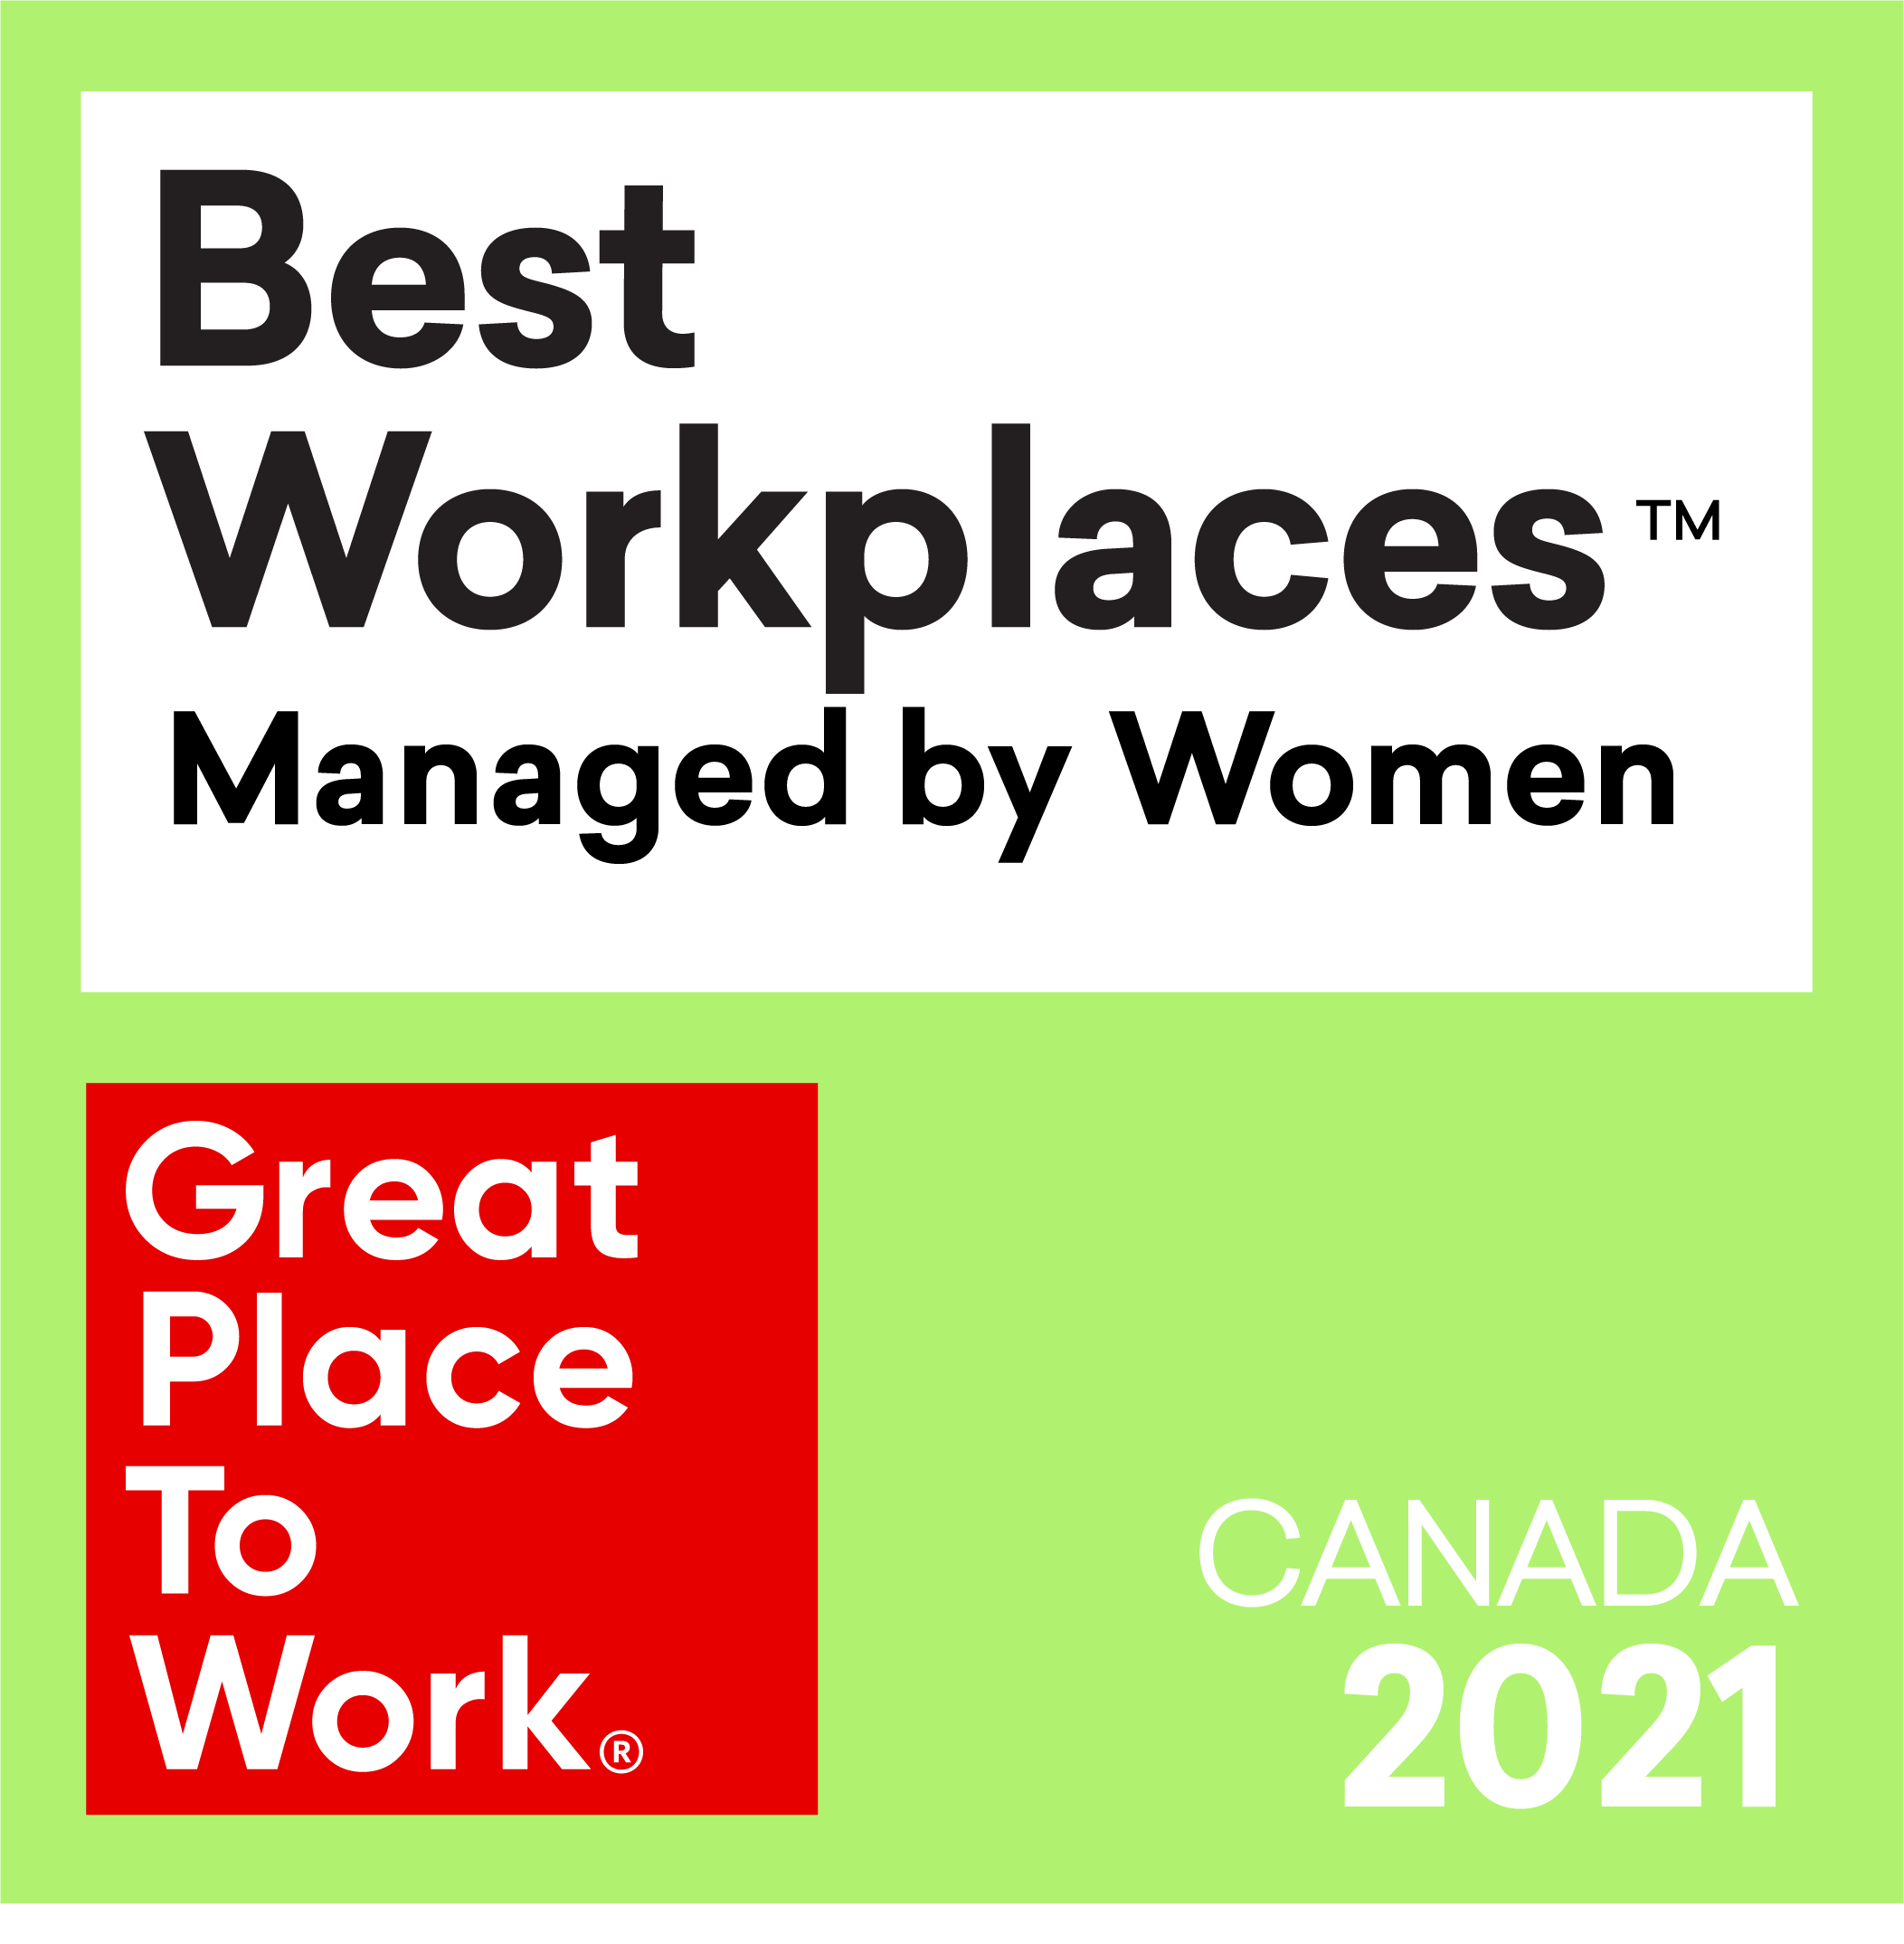 Best_Workplaces_Managed_by_Women_2021.png